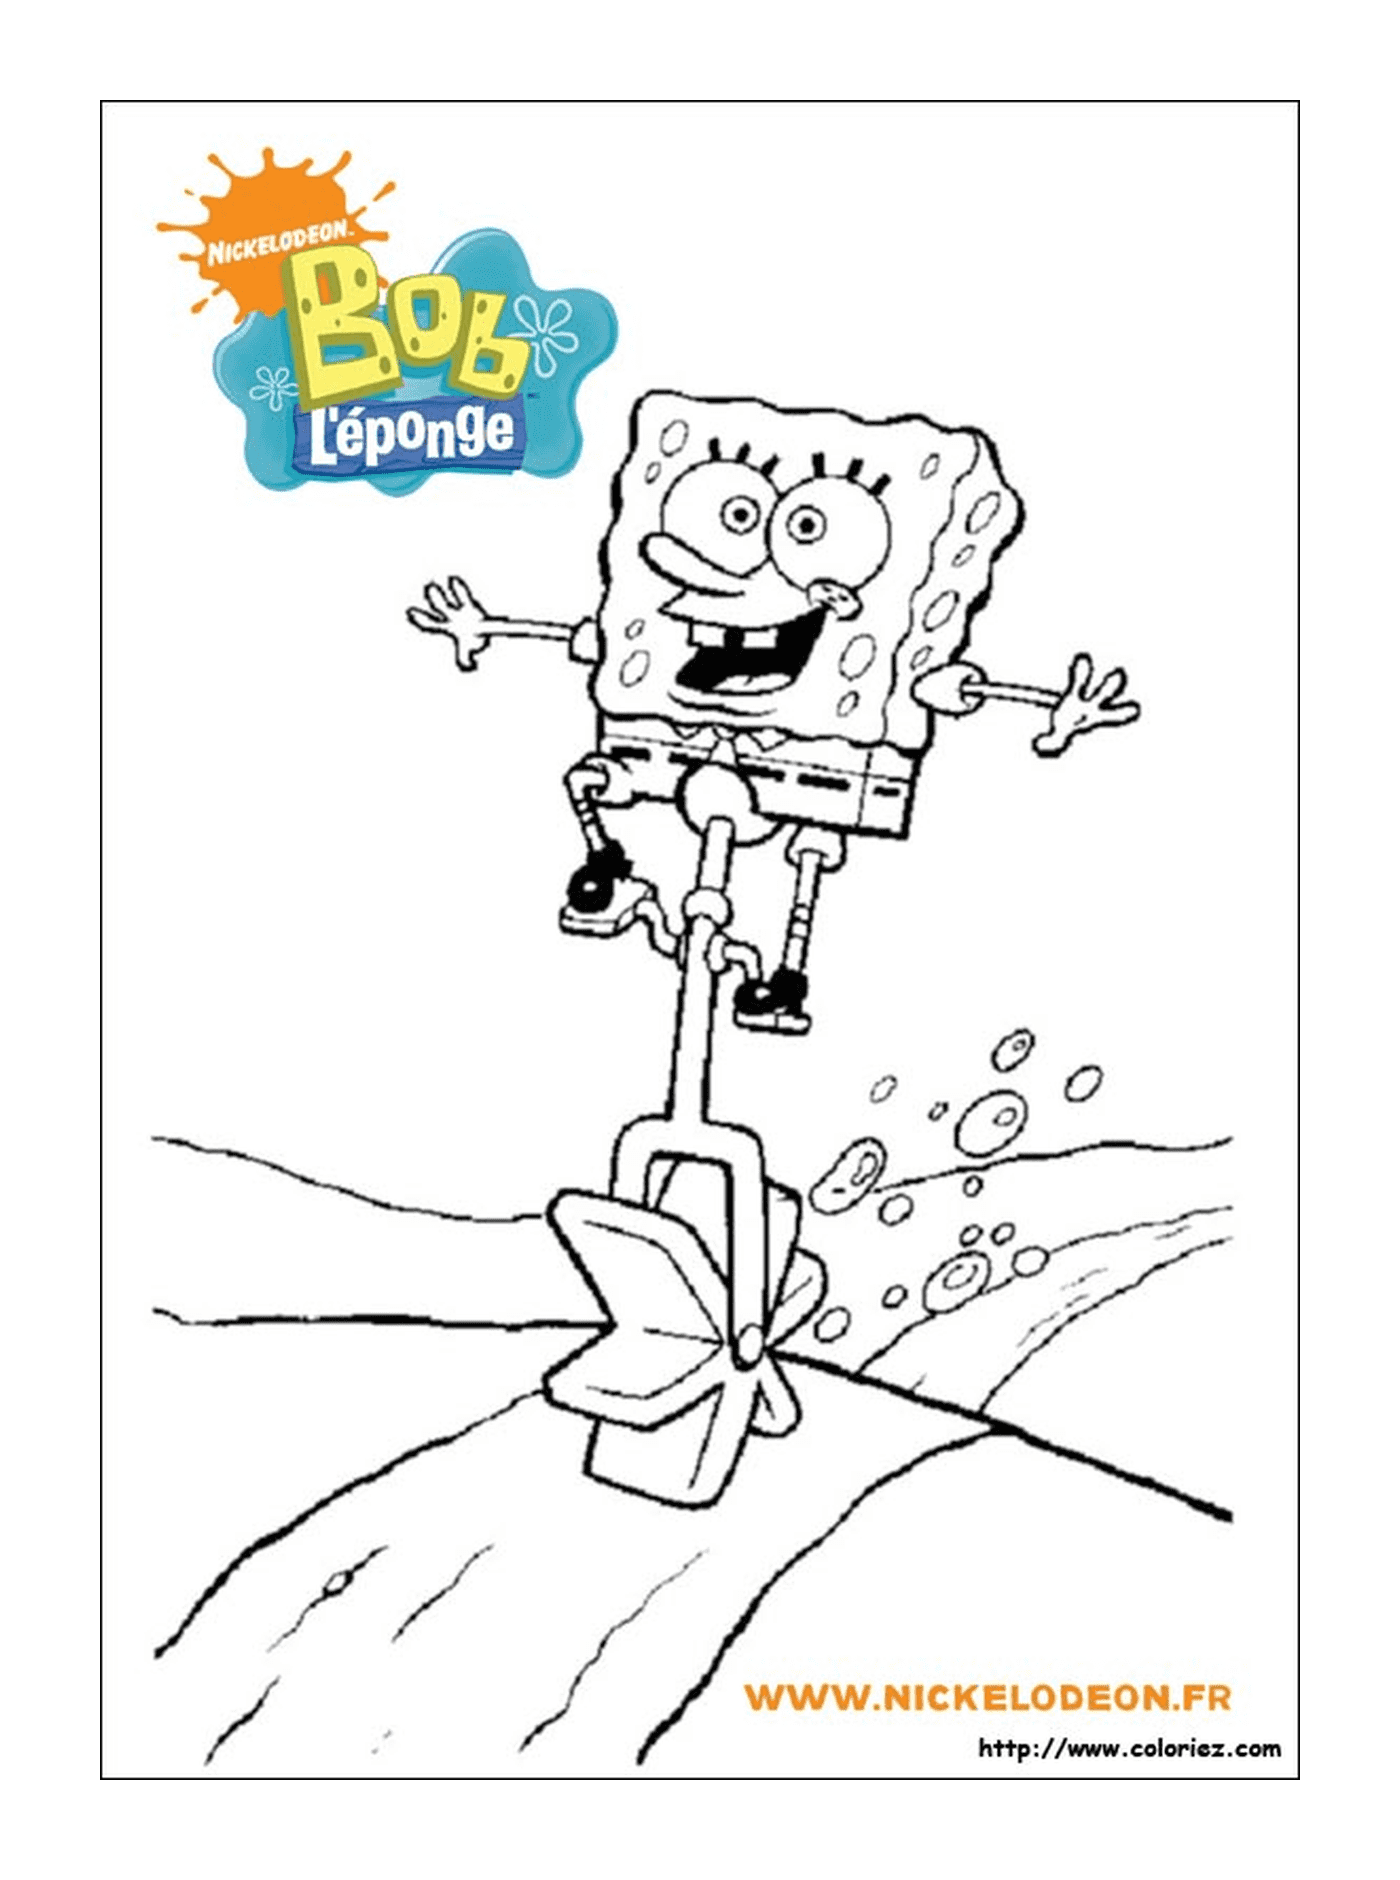  Bob the sponge jumping over a trash can 